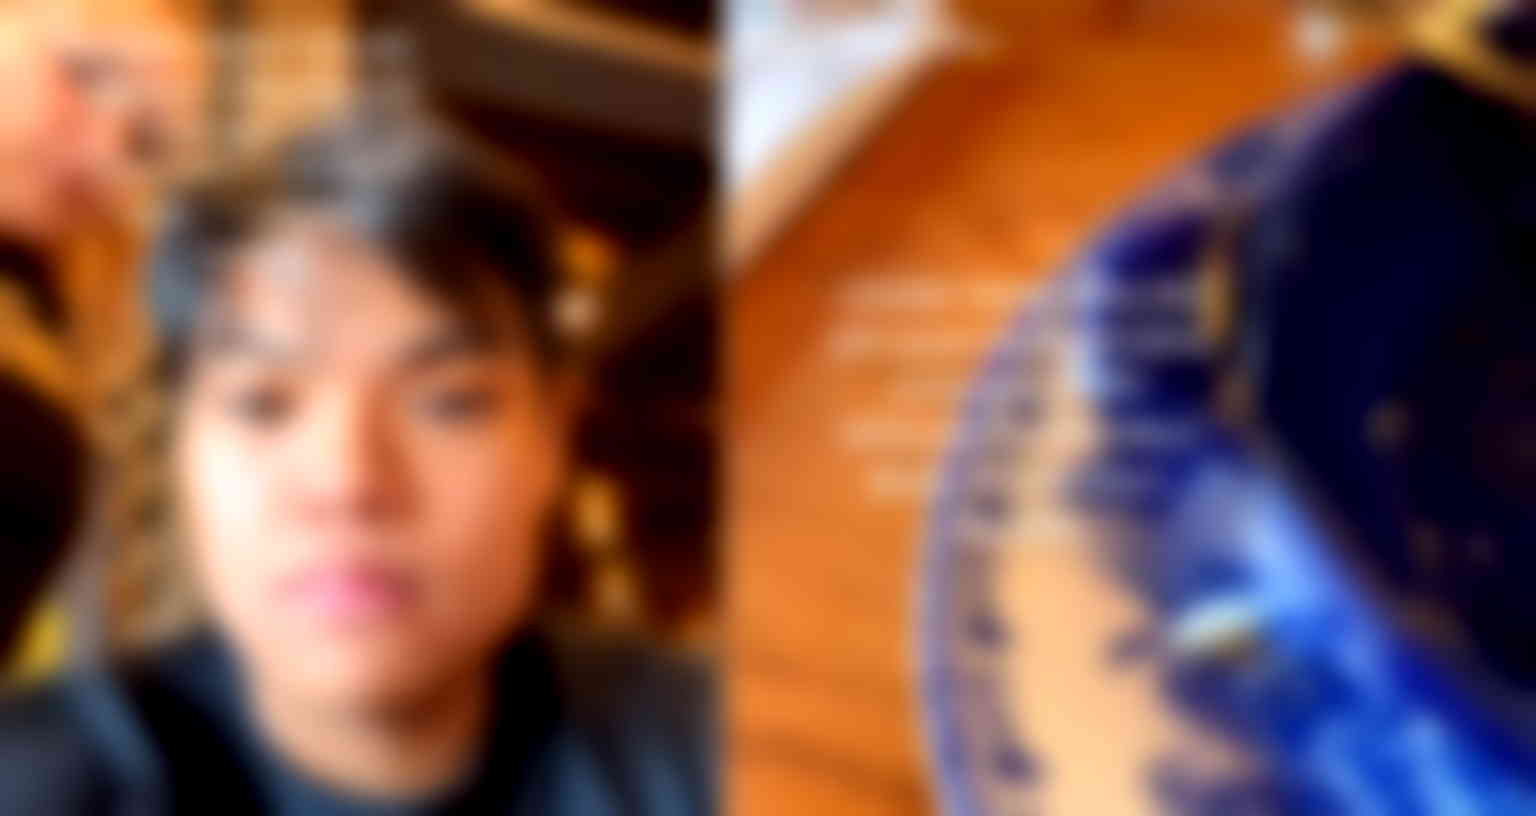 Asian TikToker’s video asking why he was the only Cracker Barrel diner given ‘fine china’ goes viral